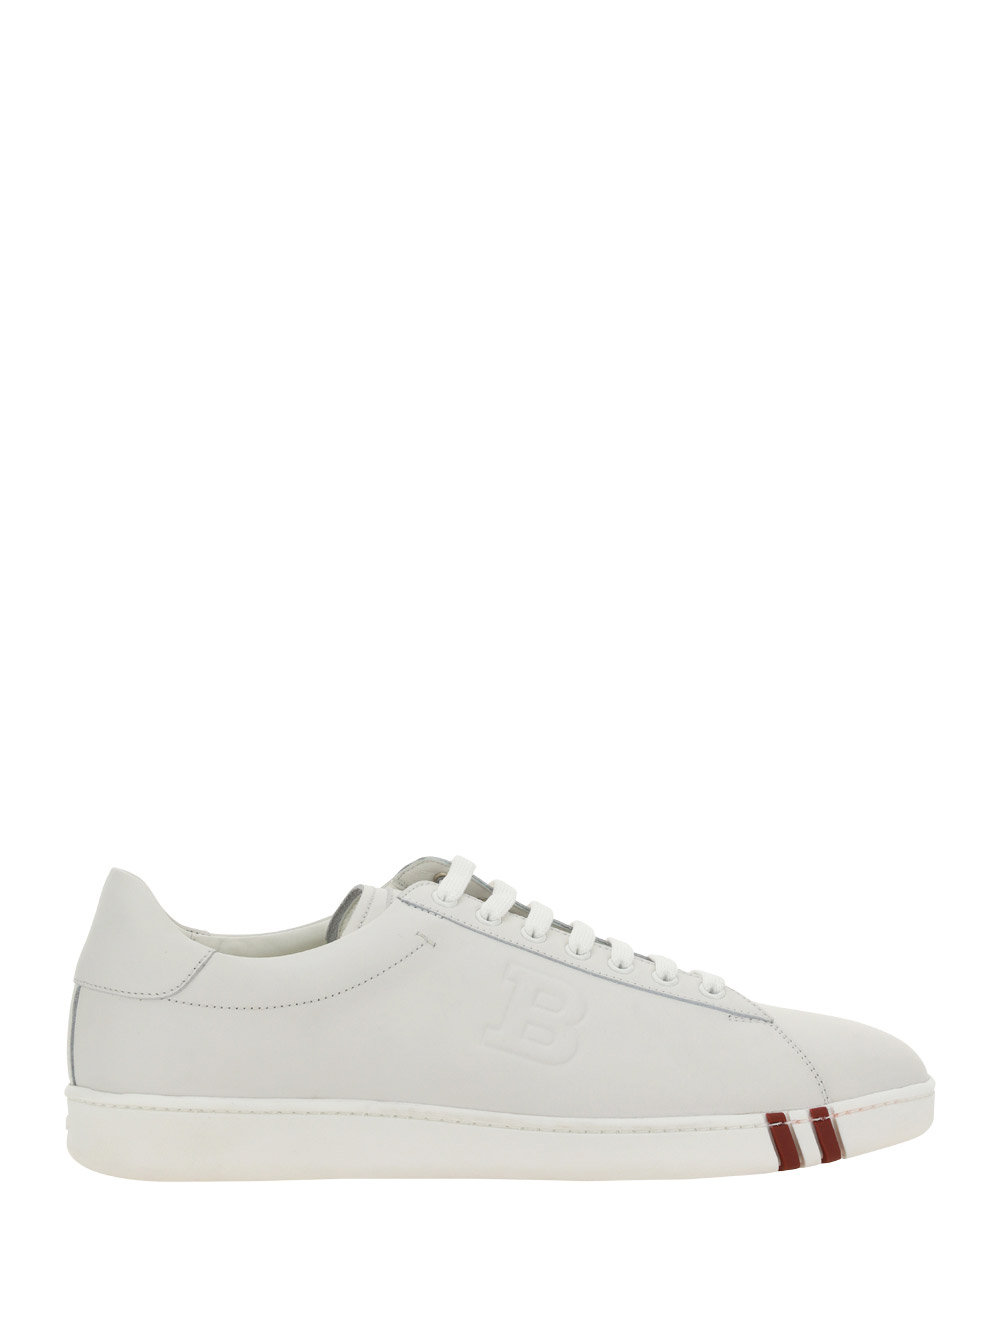 BALLY ASHER SNEAKERS,58434424875_F607